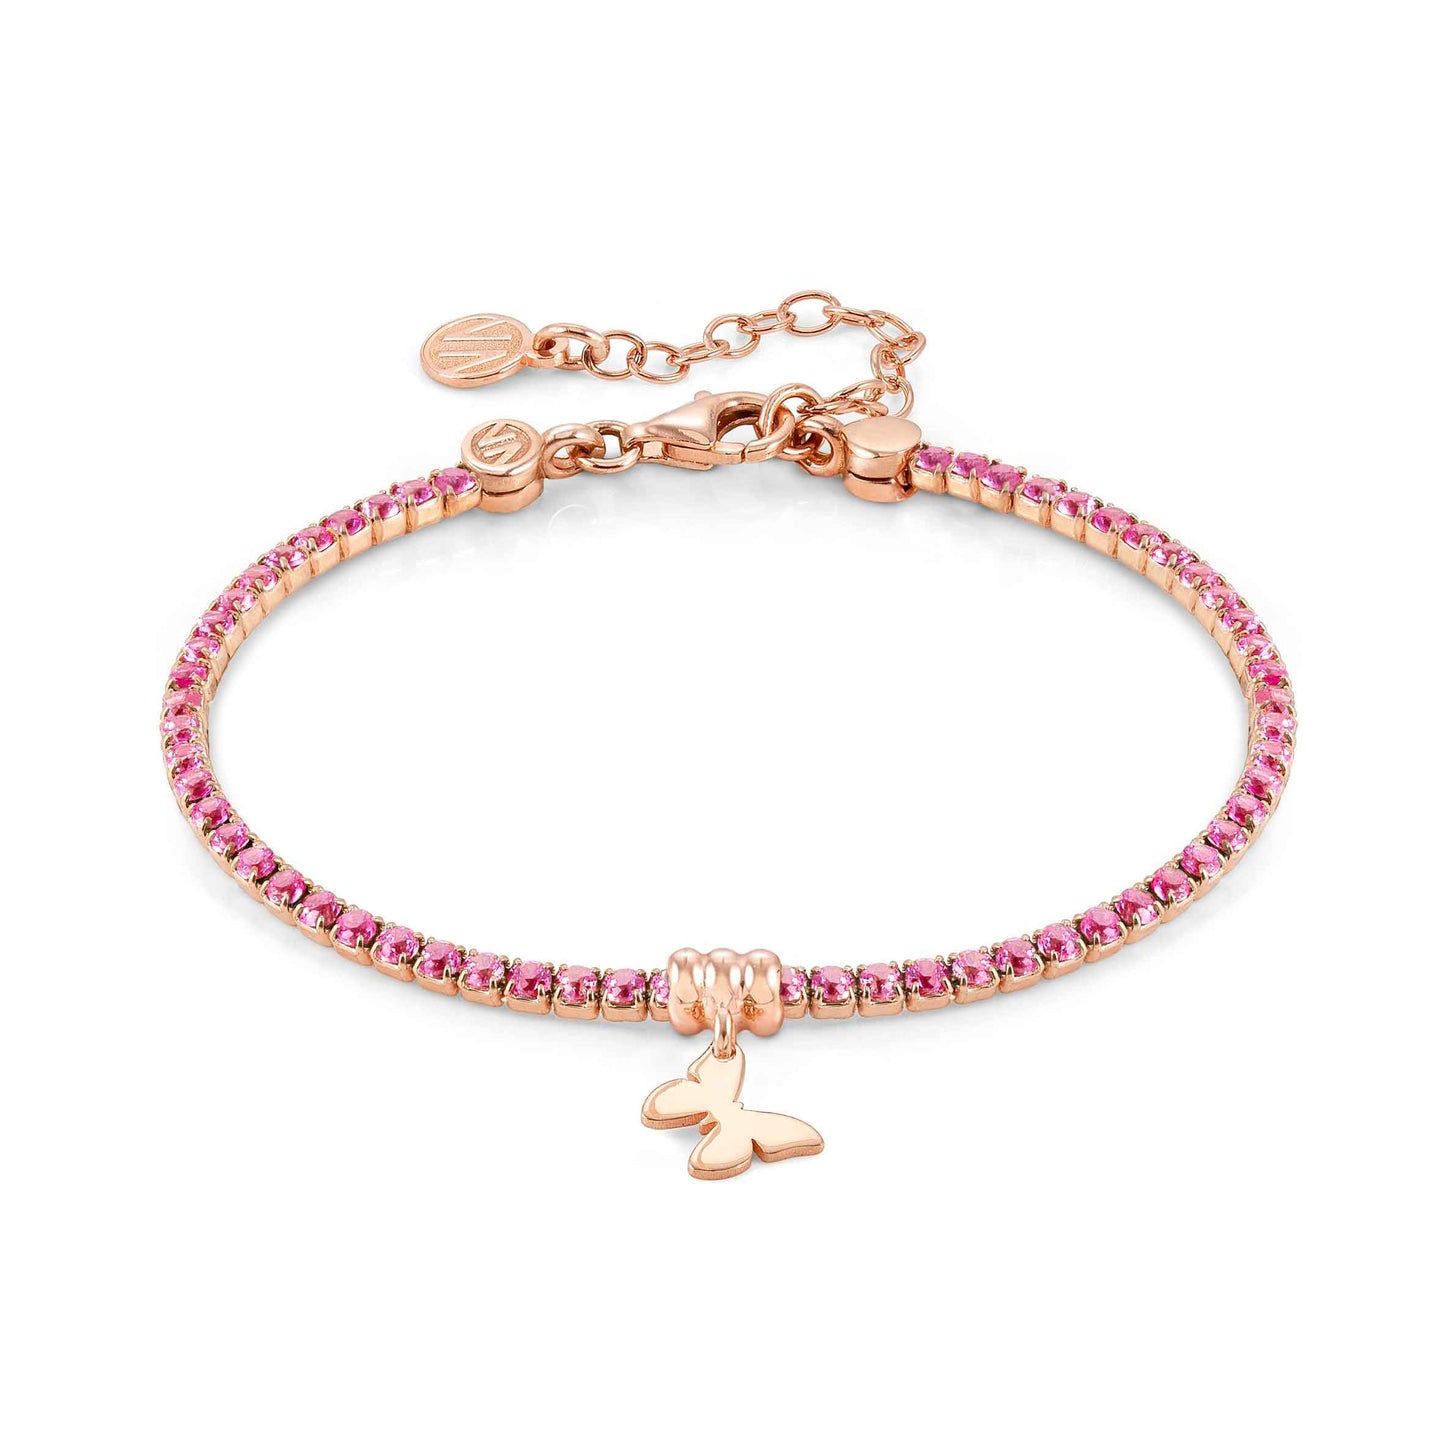 148612/036D CHIC & CHARM Sterling Silver and 22ct Rose Gold Plated Finish with PINK Cubic Zirconias and BUTTERFLY Bracelet